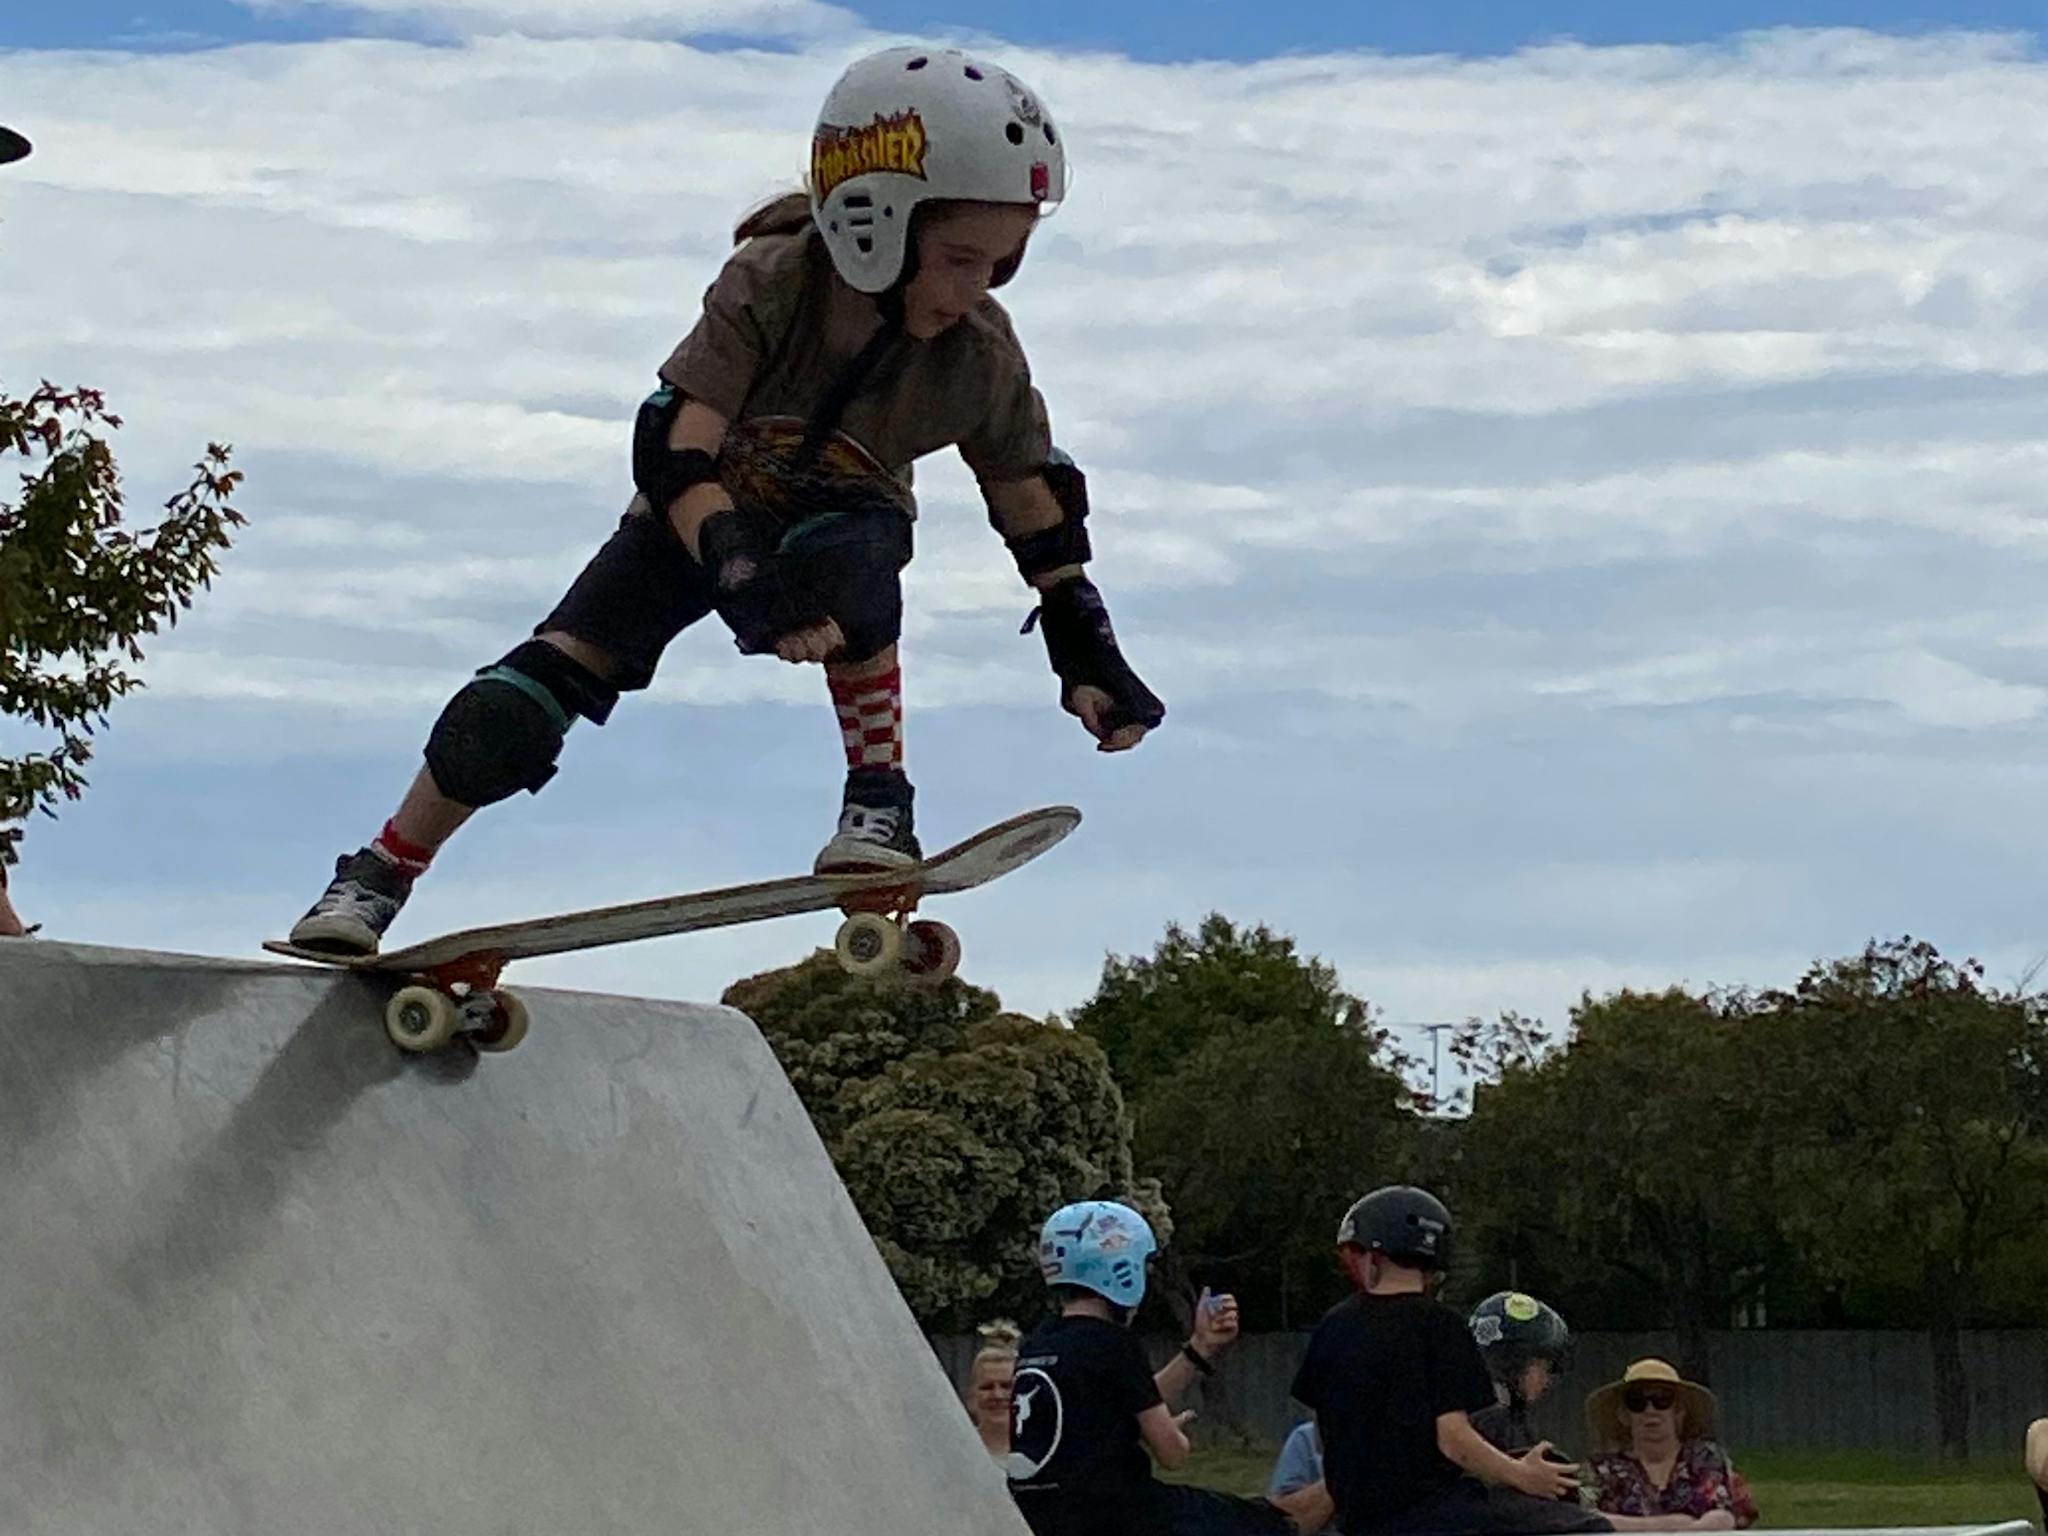 Child on top of cement skate park doing a trick in the air with other people watching in background